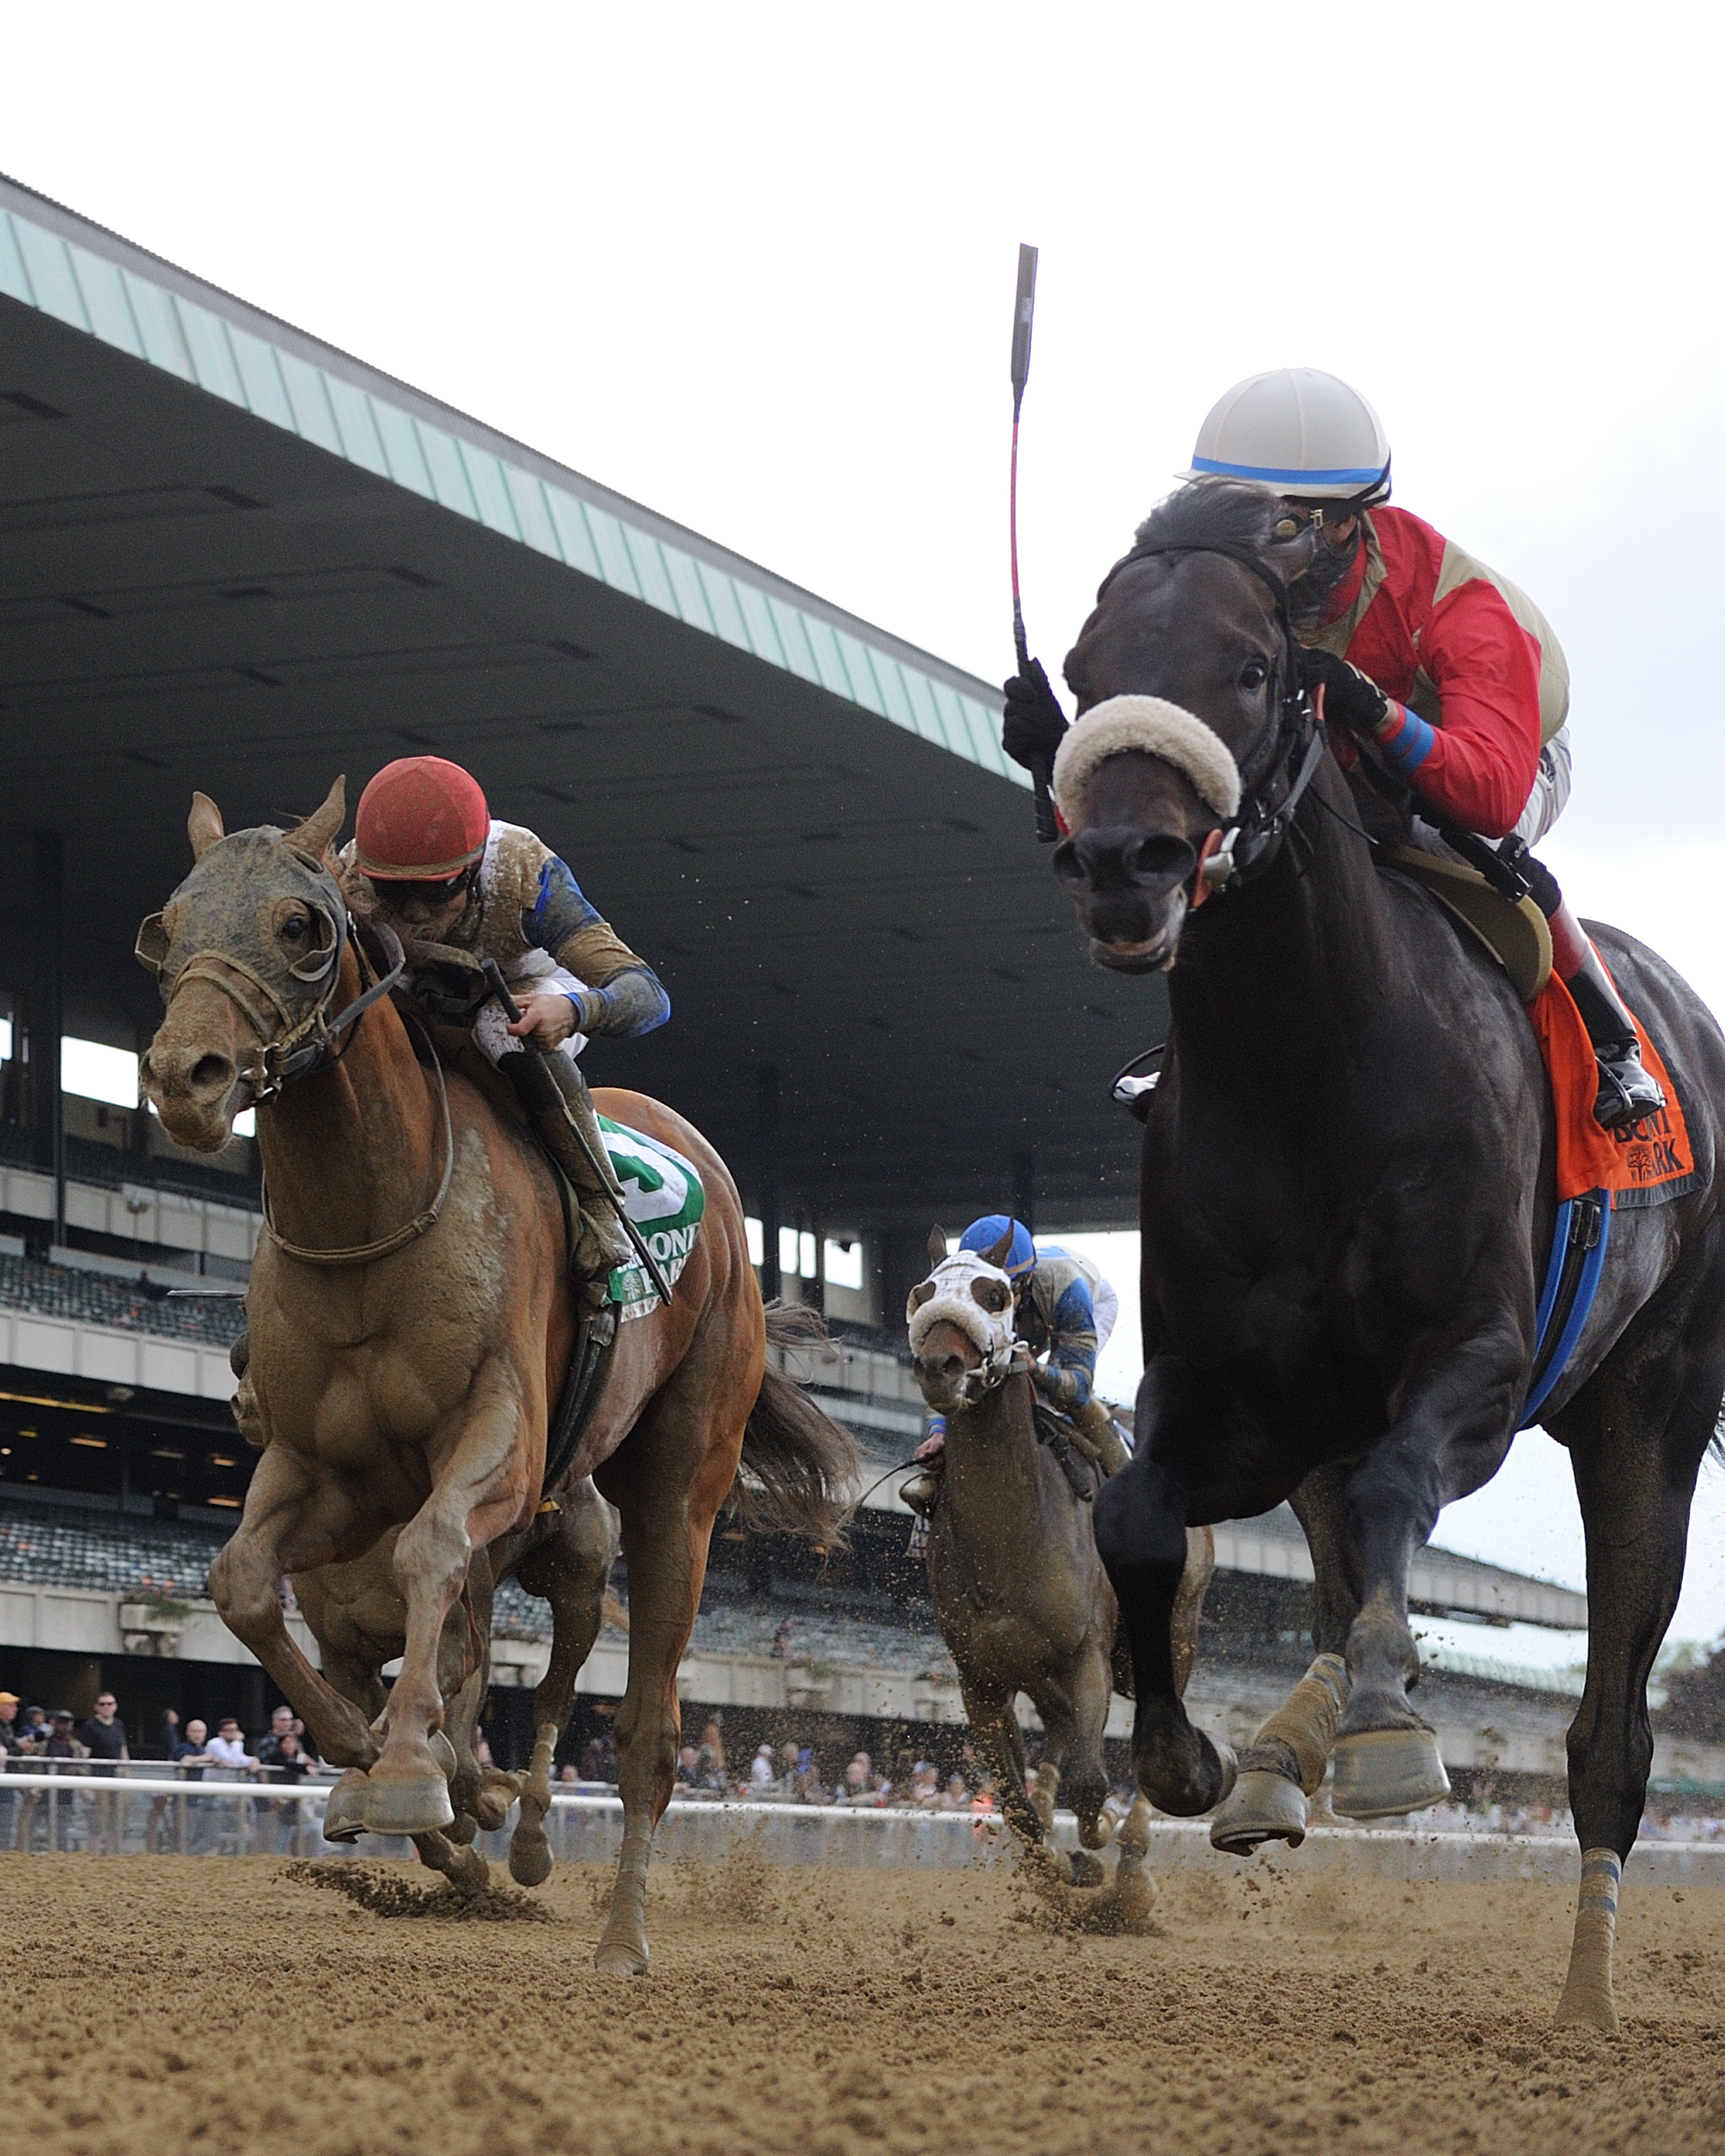 Governor Malibu (left) runs at Unified in the Peter Pan Stakes at Belmont Park (photo via NYRA/Adam Coglianese).